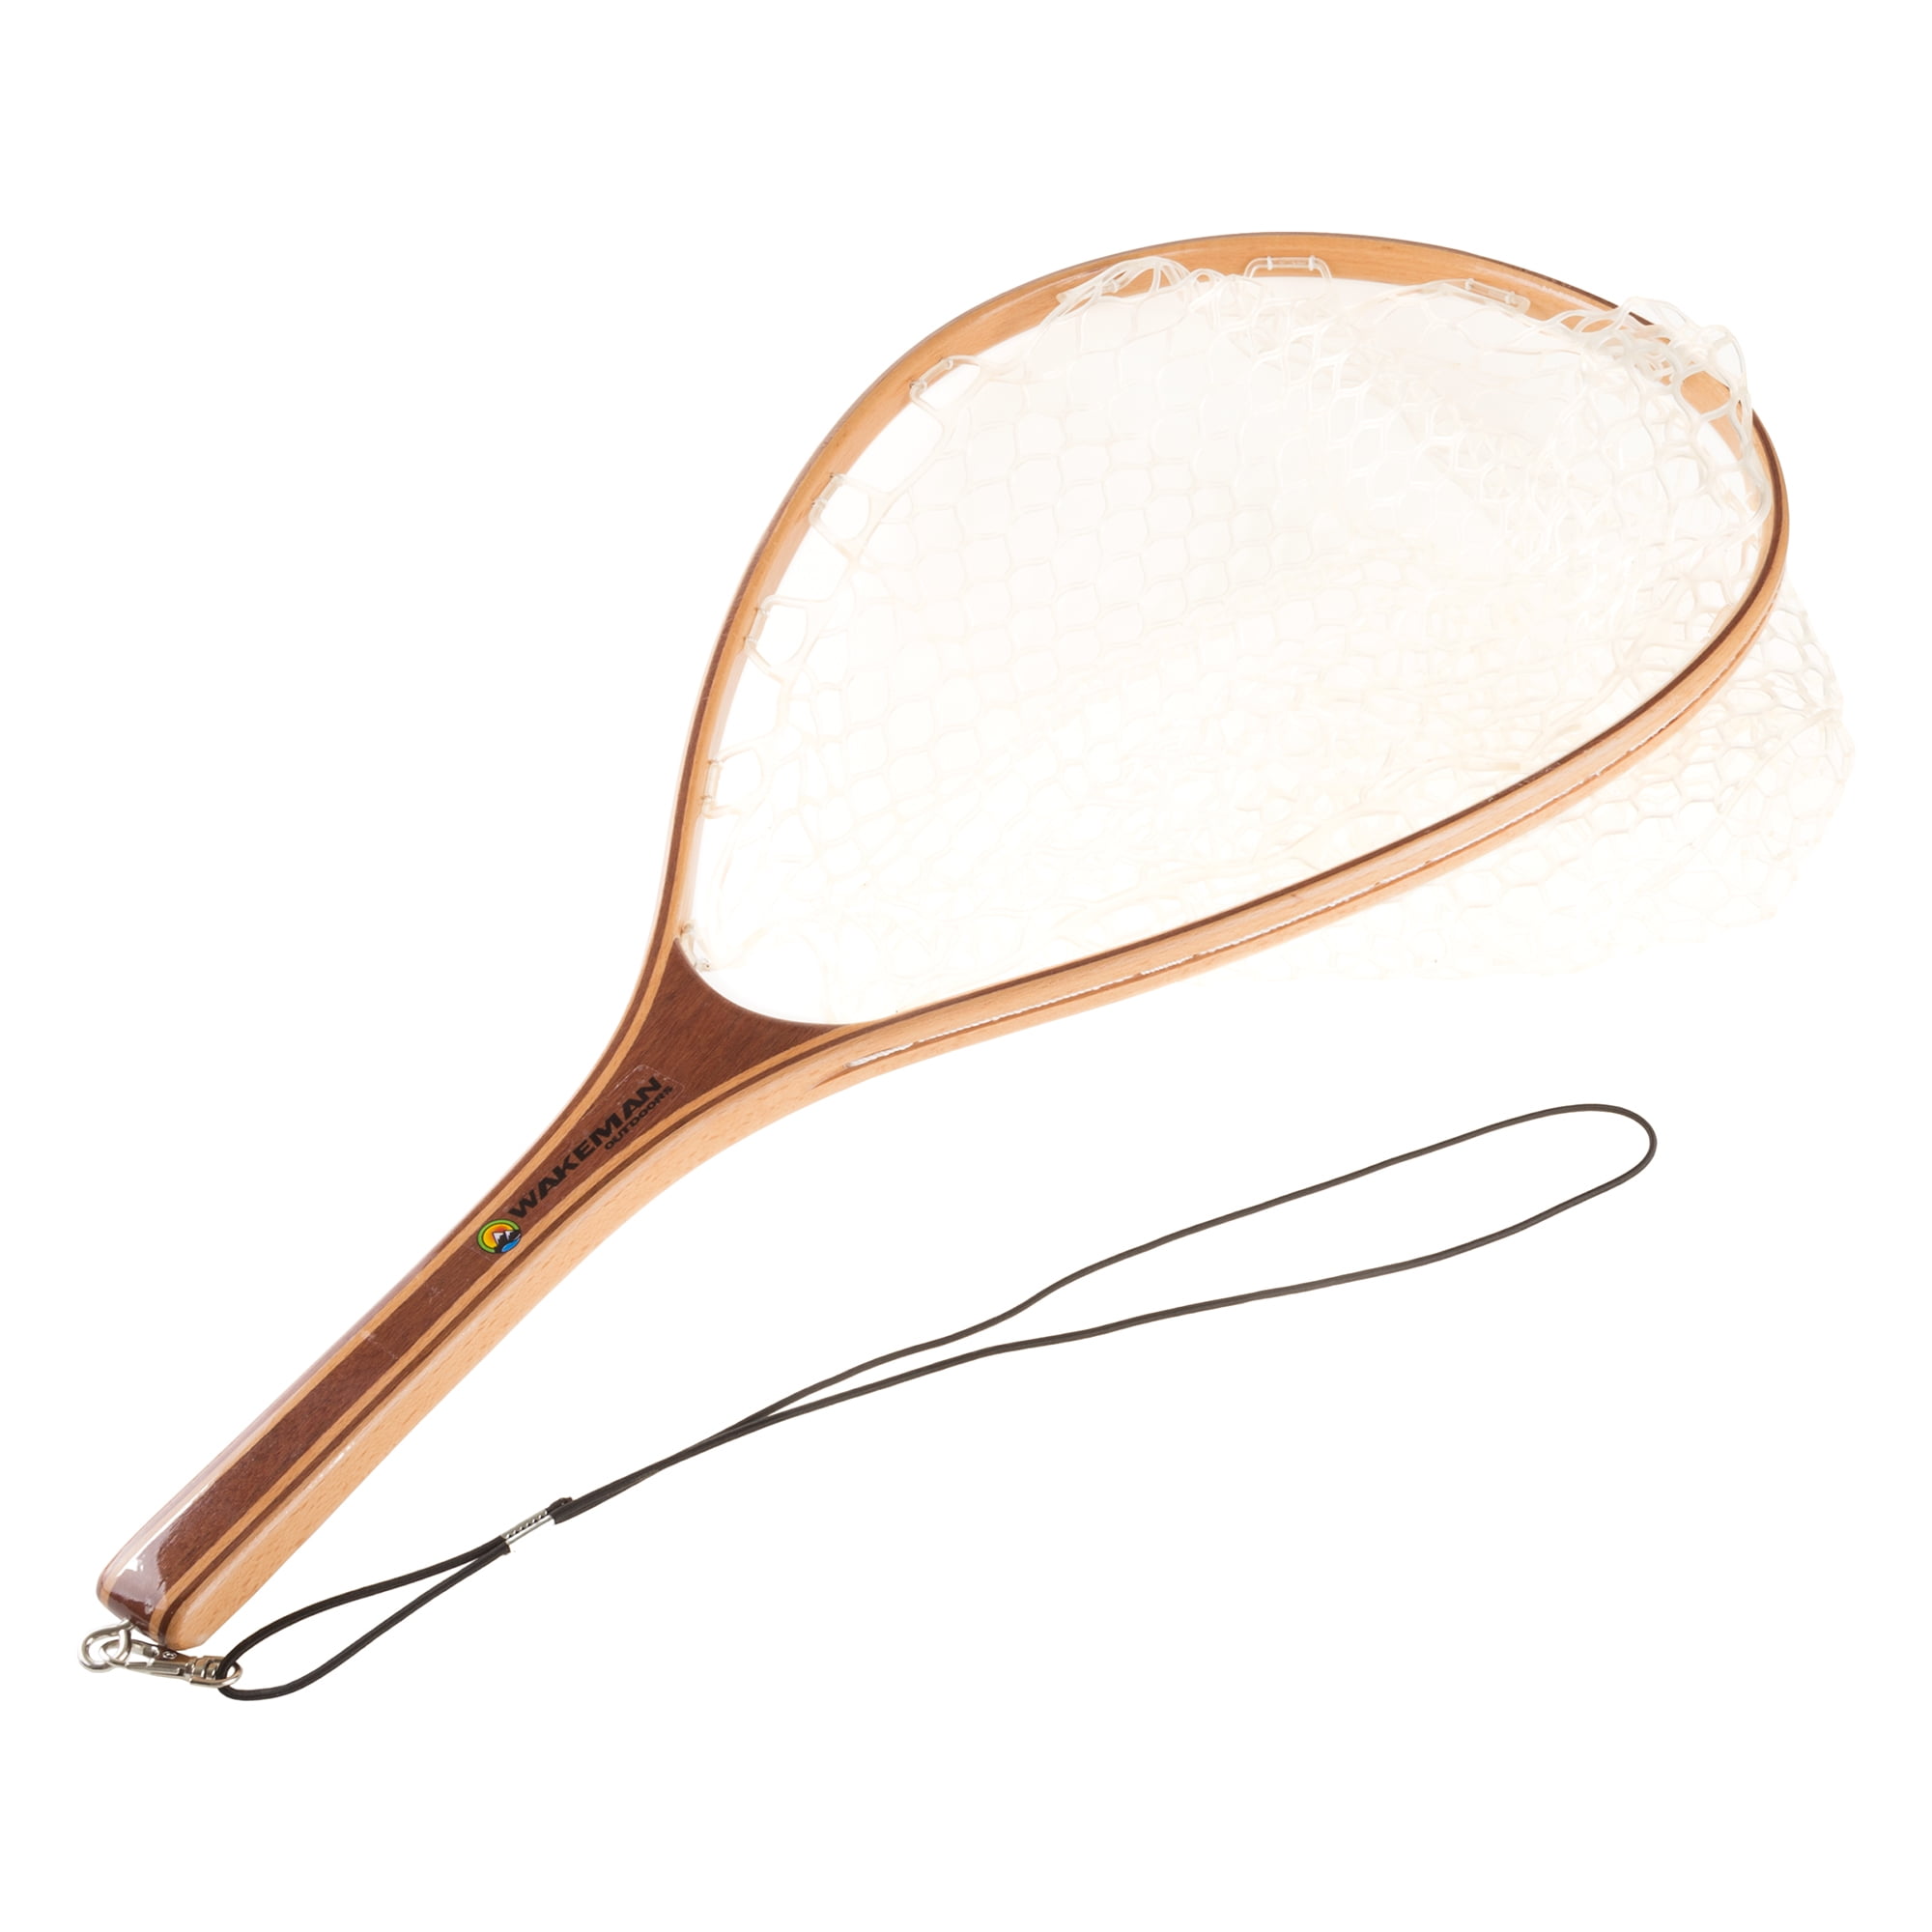 US Transparent Wooden Handle Fly Fishing Landing Mesh Trout Catch Rubber Scoop 